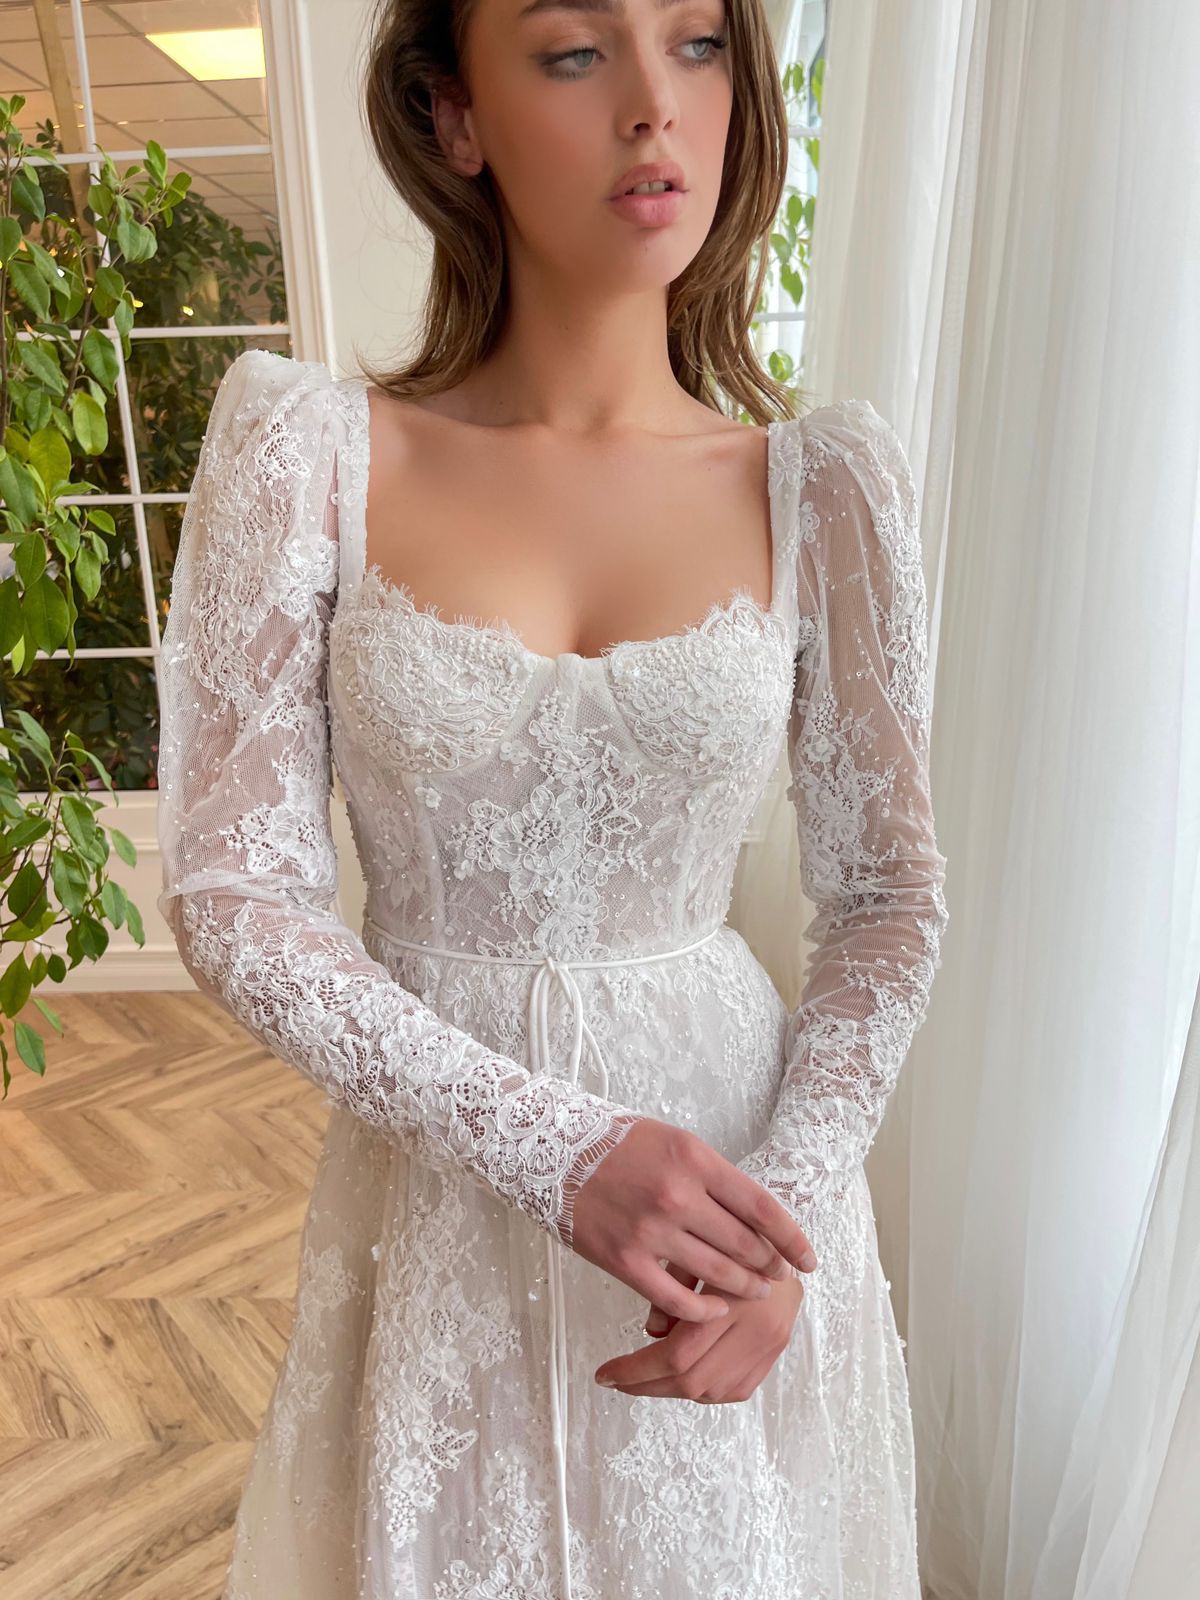 White A-Line bridal dress with long sleeves, lace and embroidery